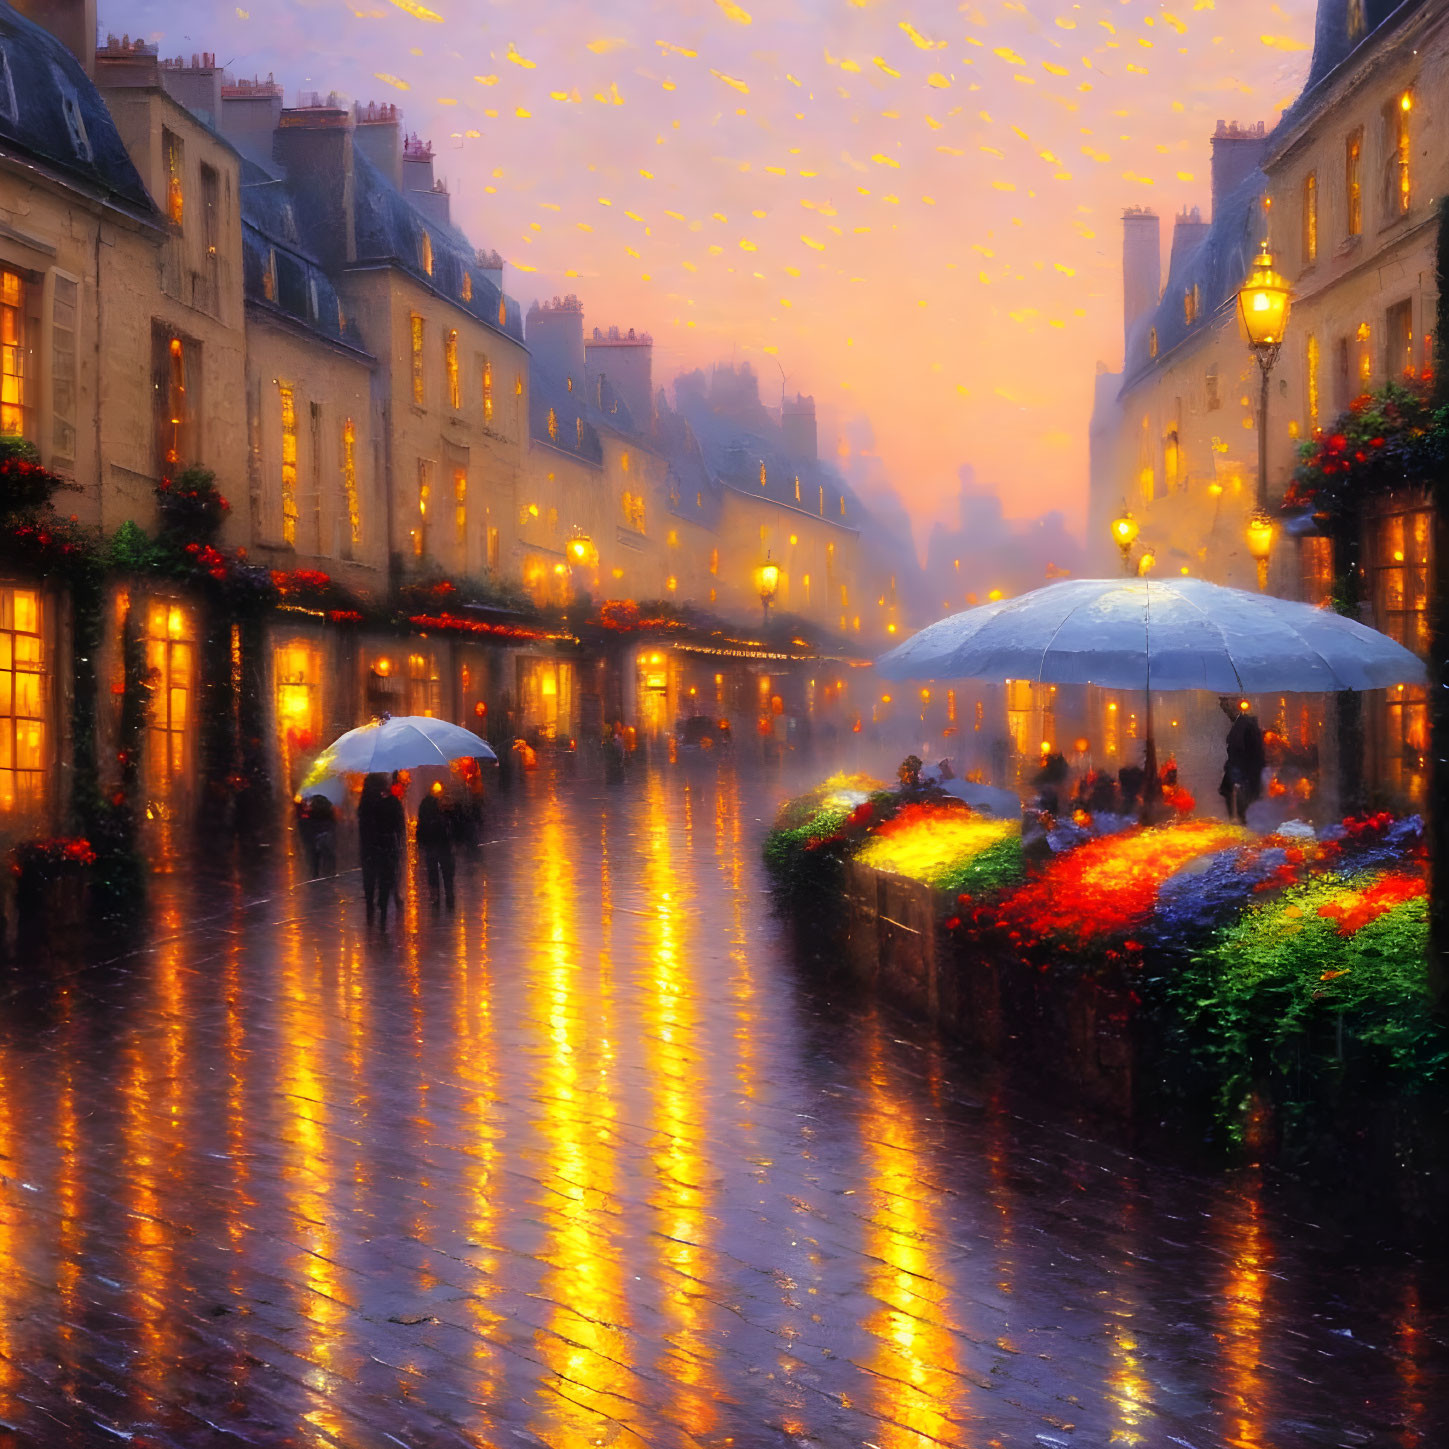 City street at twilight with glowing lights, wet cobblestones, umbrellas, and colorful flowers